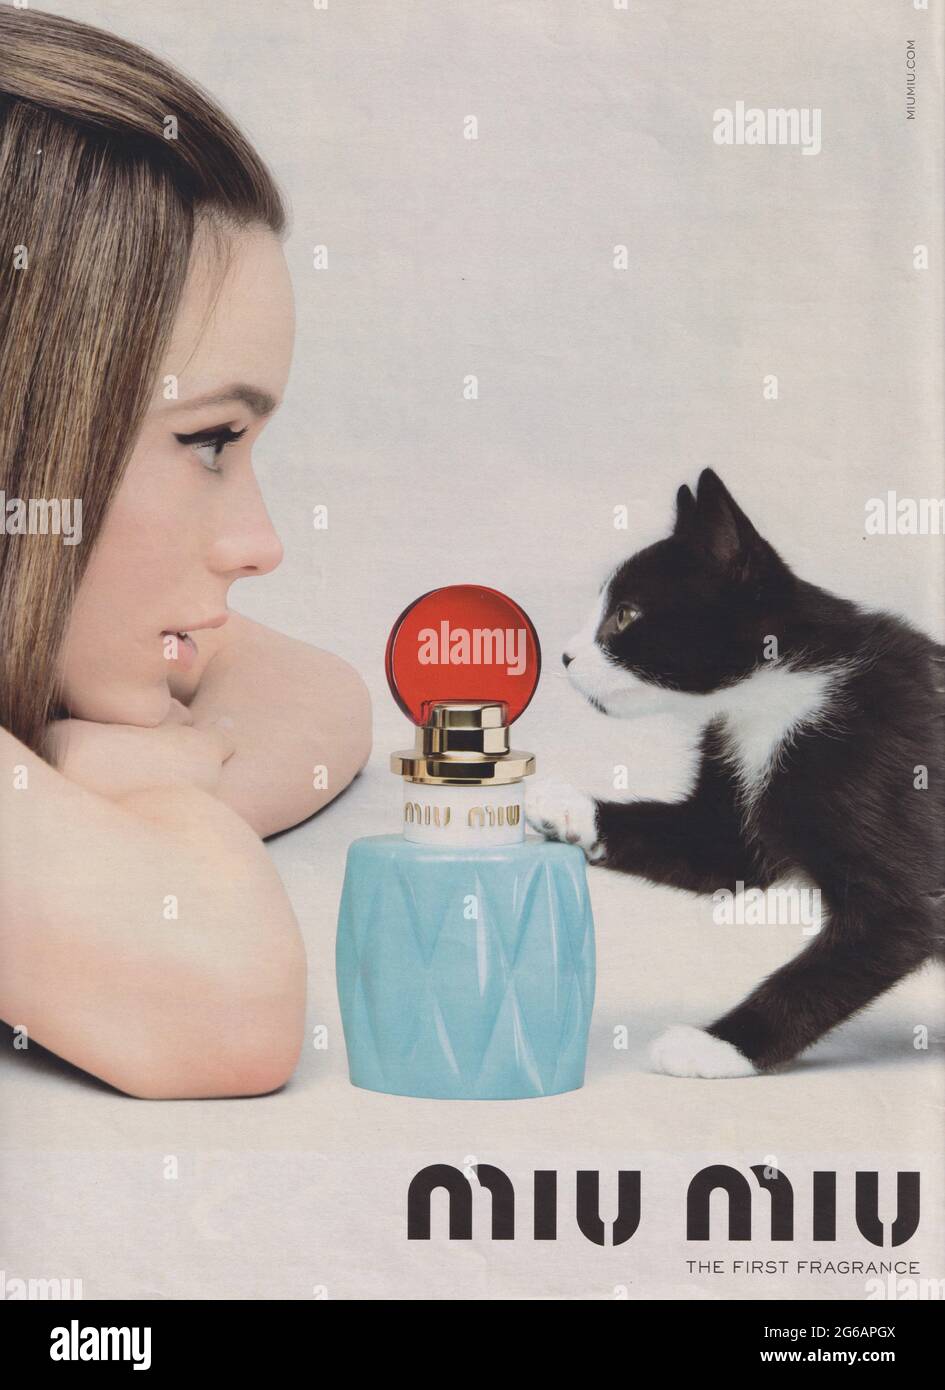 poster advertising Miu Miu The First Fragrance with Stacy Martin in magazine from 2015, advertisement, creative Miu Miu 2010s advert Stock Photo